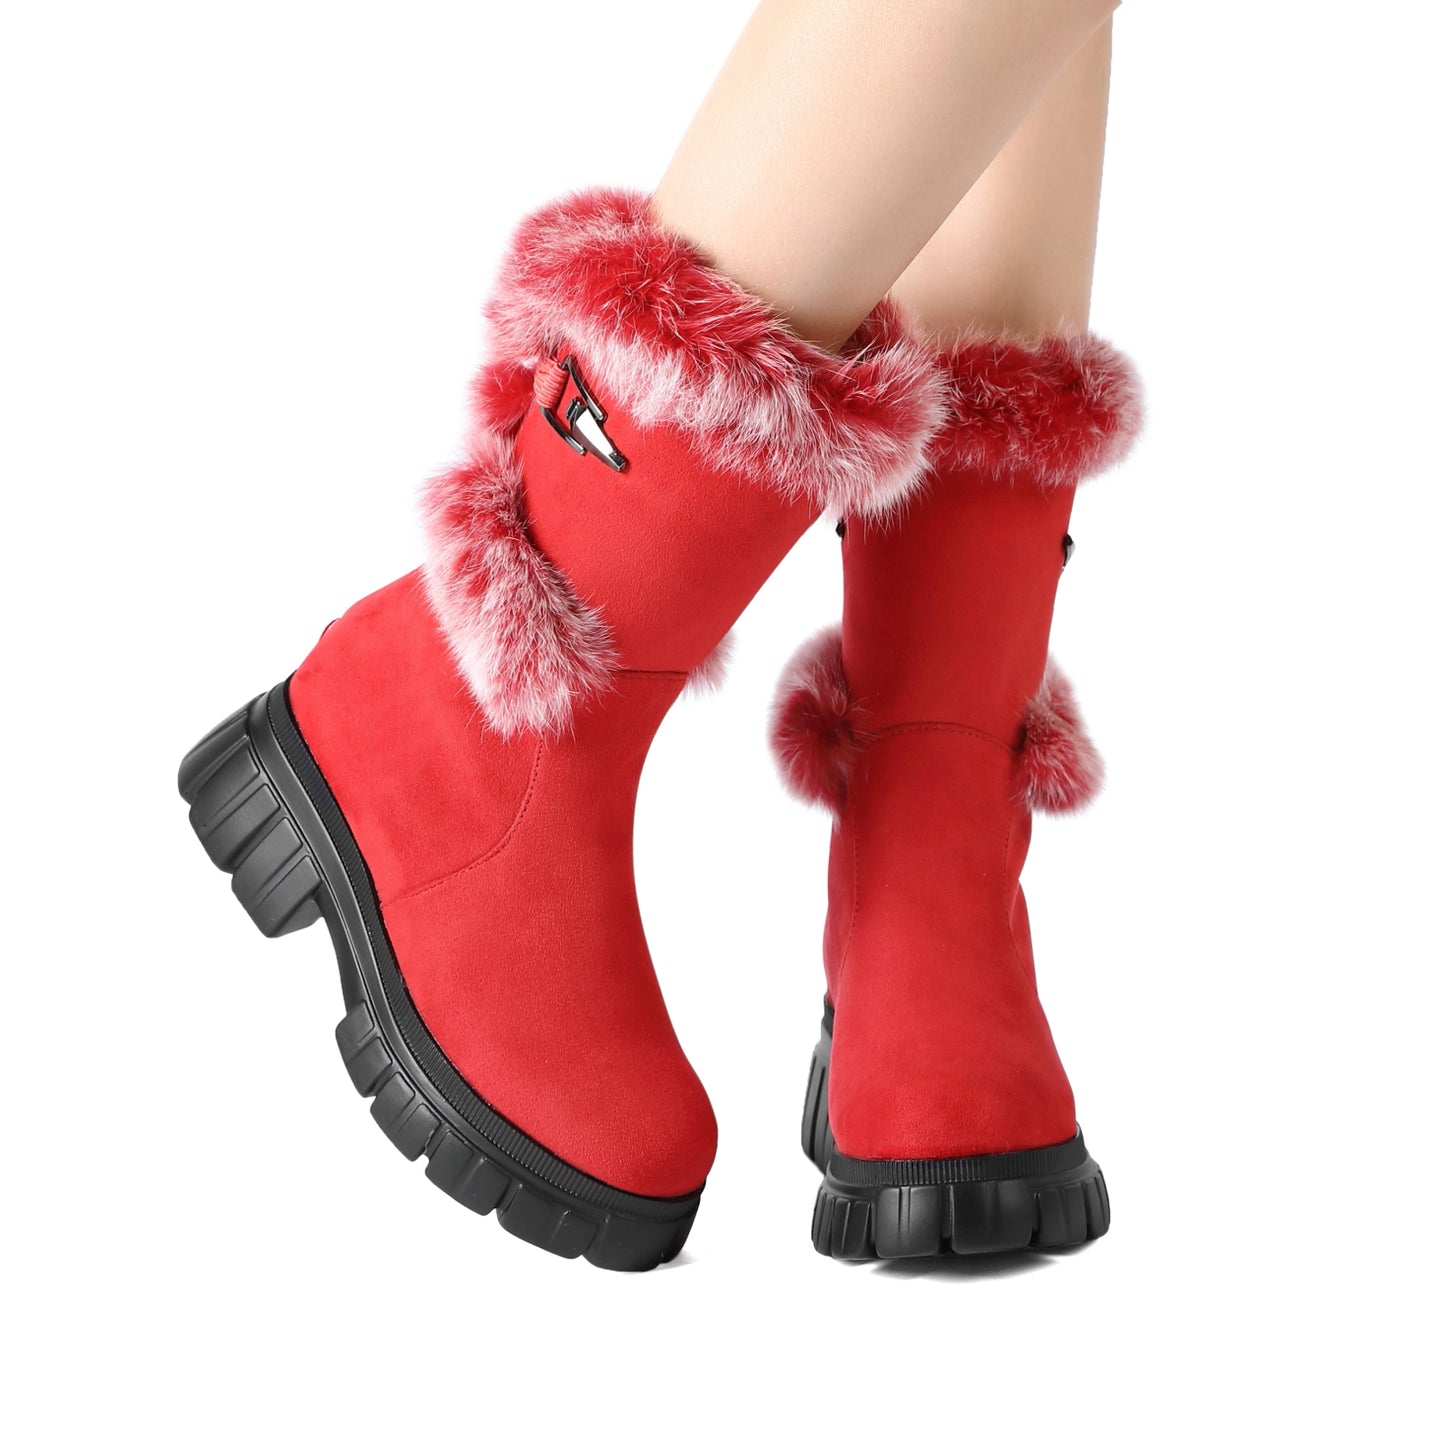 Women's Snow Ankle Boots With Genuine Rabbit Fur Sexy Furry Wedge mid calf Low Heel Winter Boots